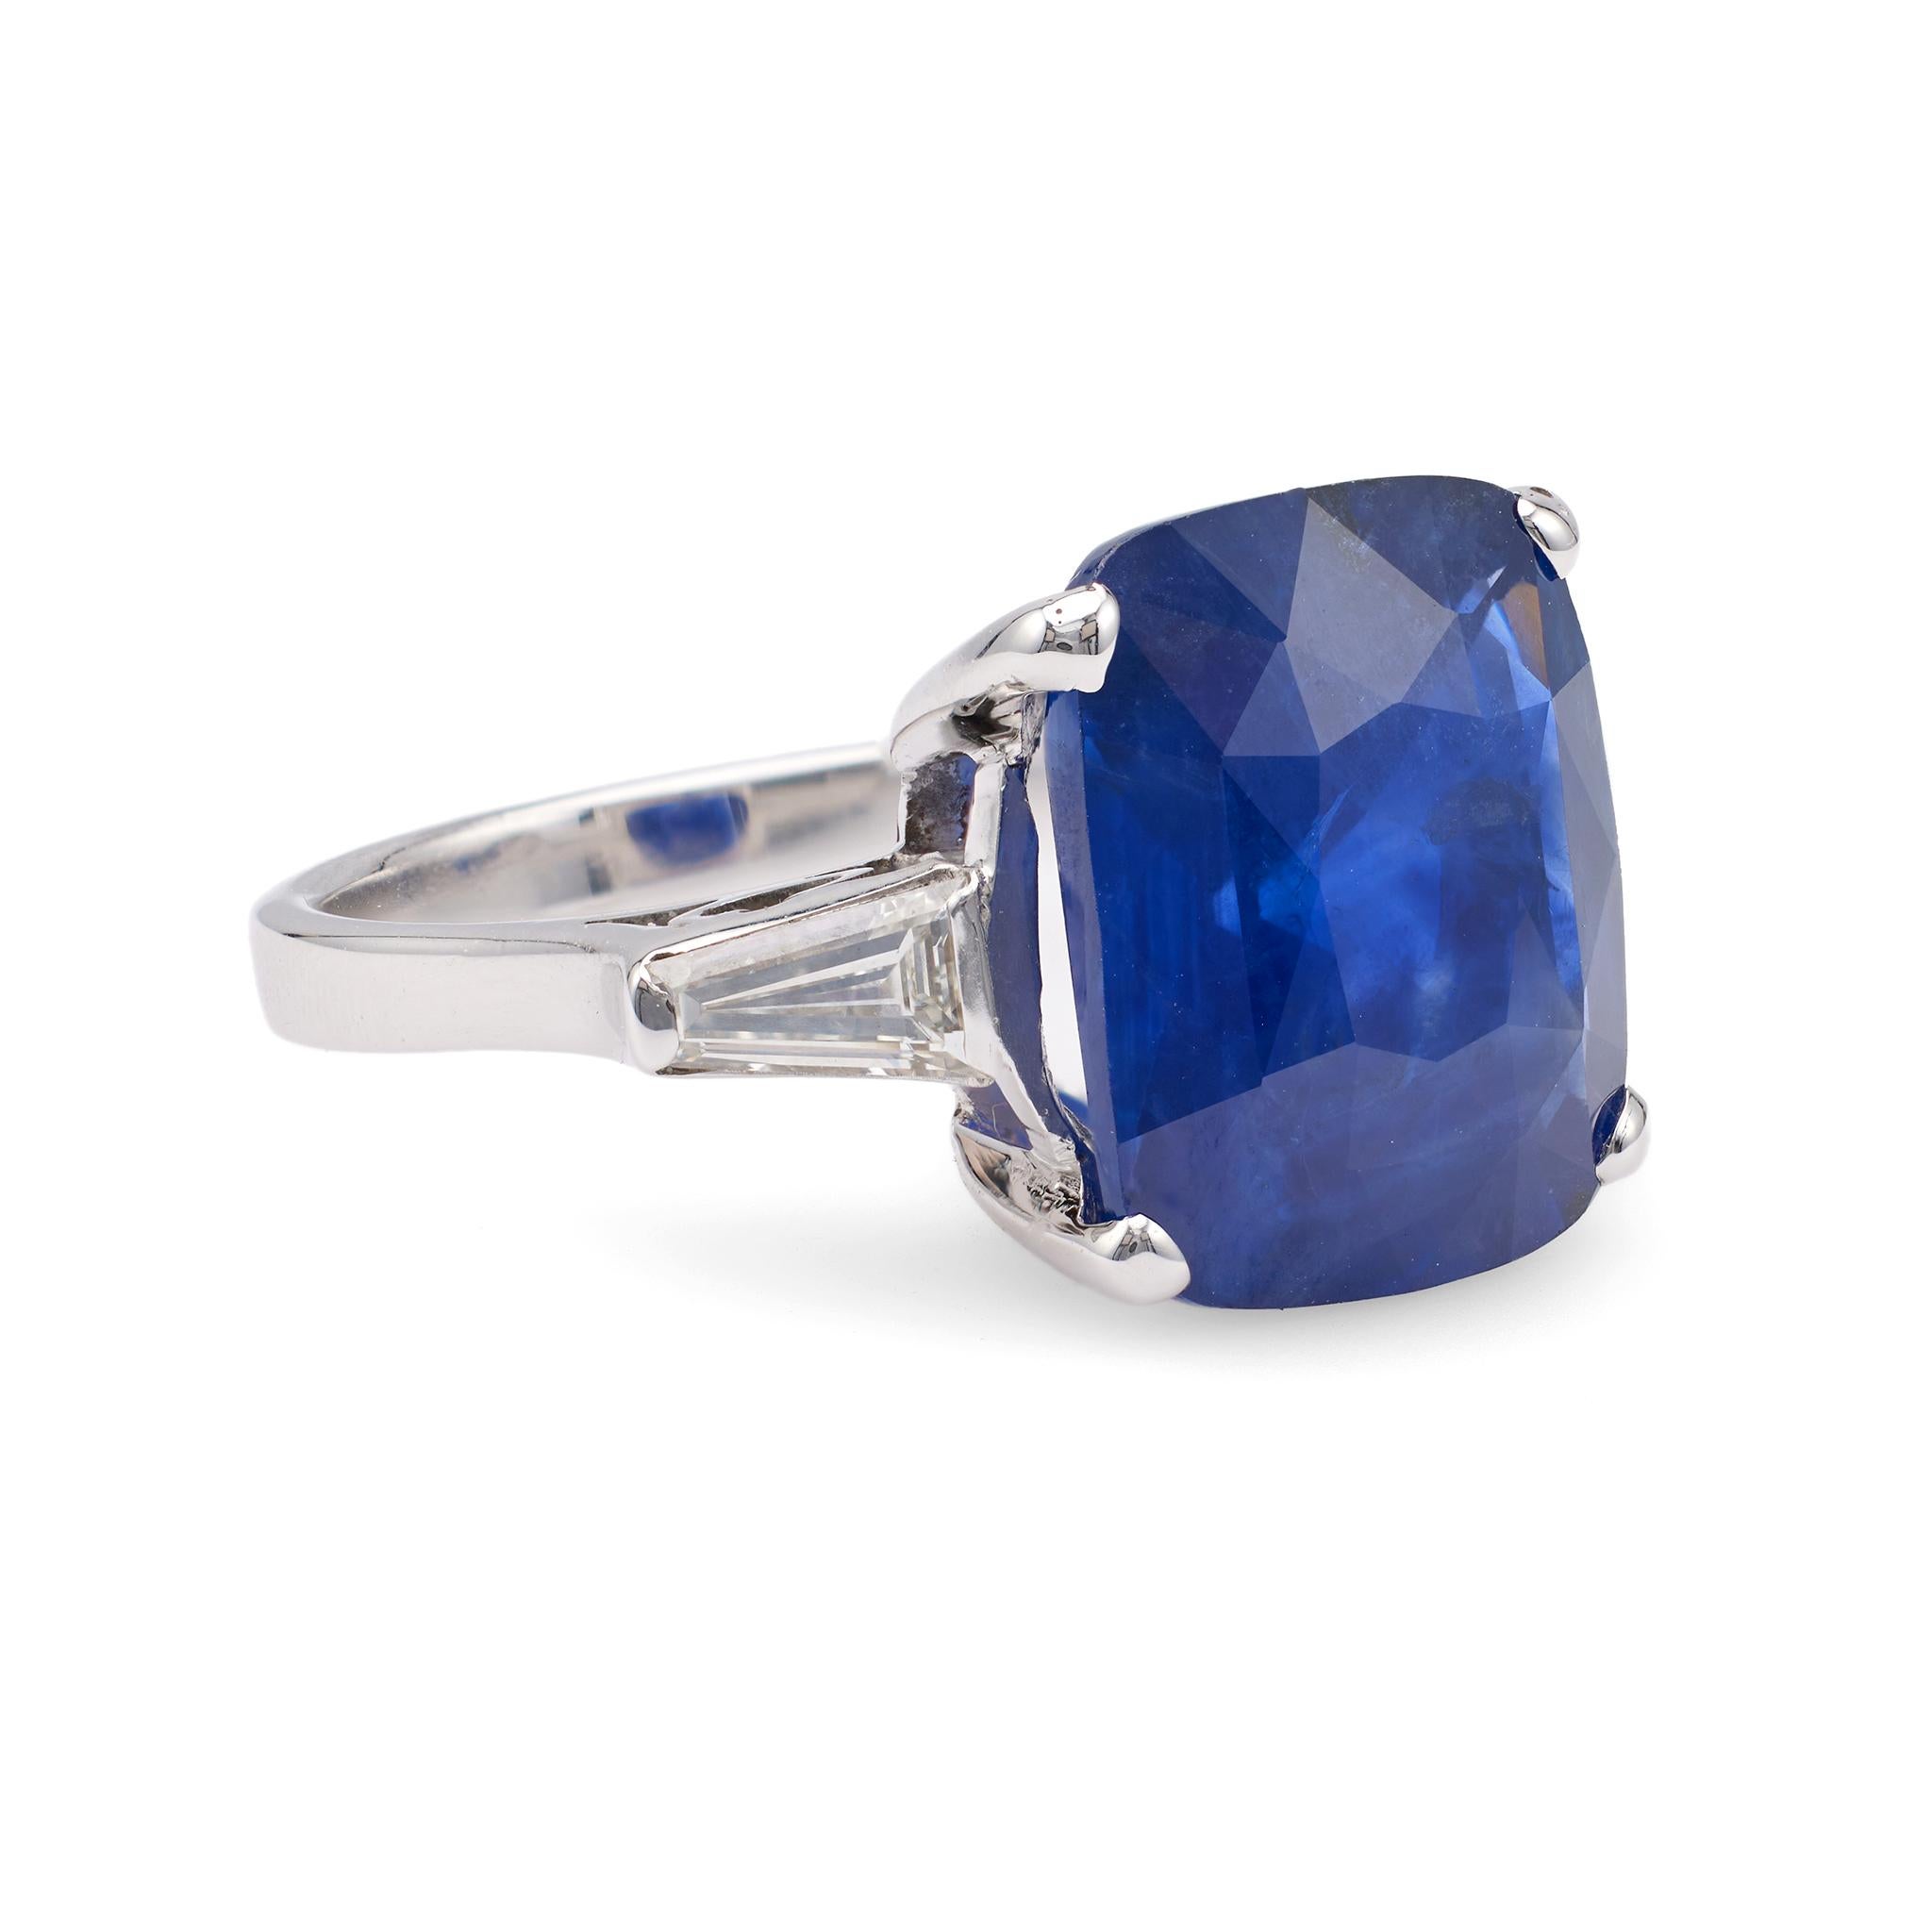 Vintage French GIA 8.20 Carat Ceylon Sapphire Diamond 18k White Gold Ring In Good Condition For Sale In Beverly Hills, CA